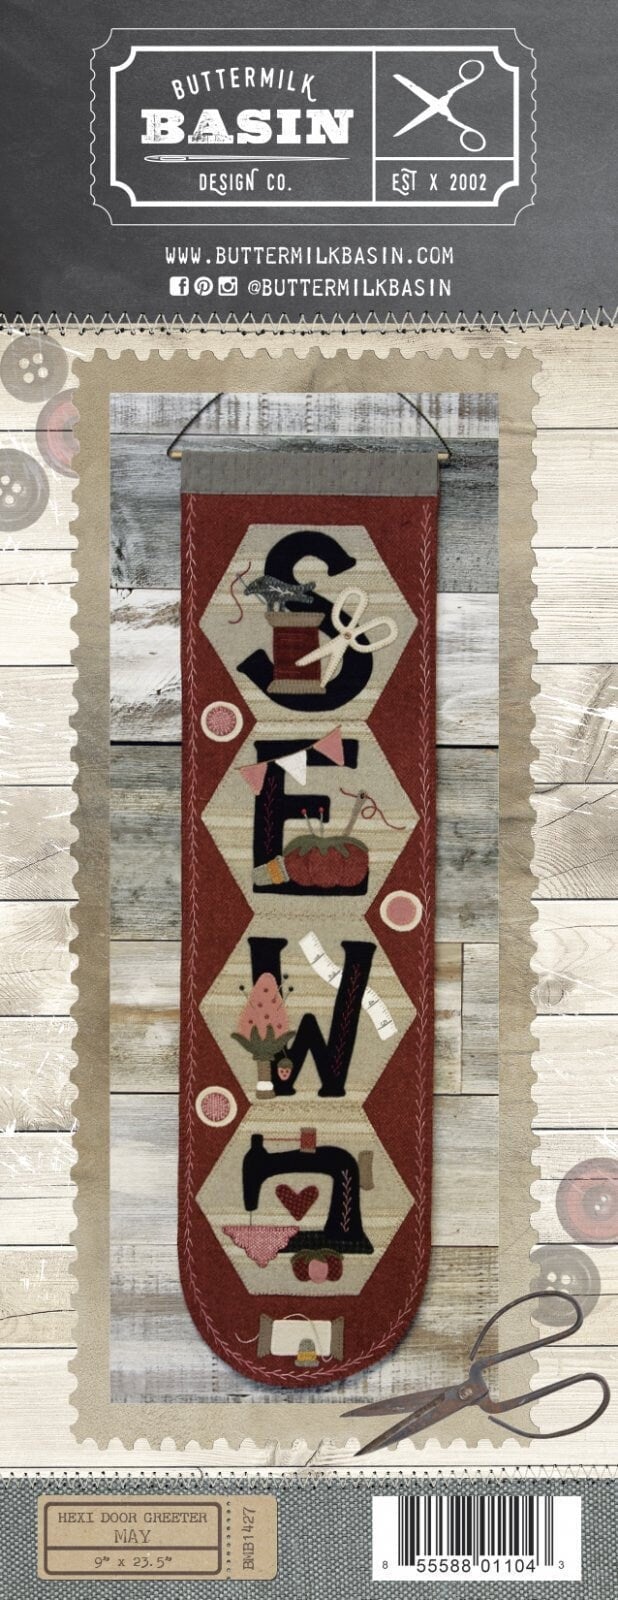 Vintage SEW Banner Pattern by Stacy West of Buttermilk Basin, Hexi Door Greeter for May